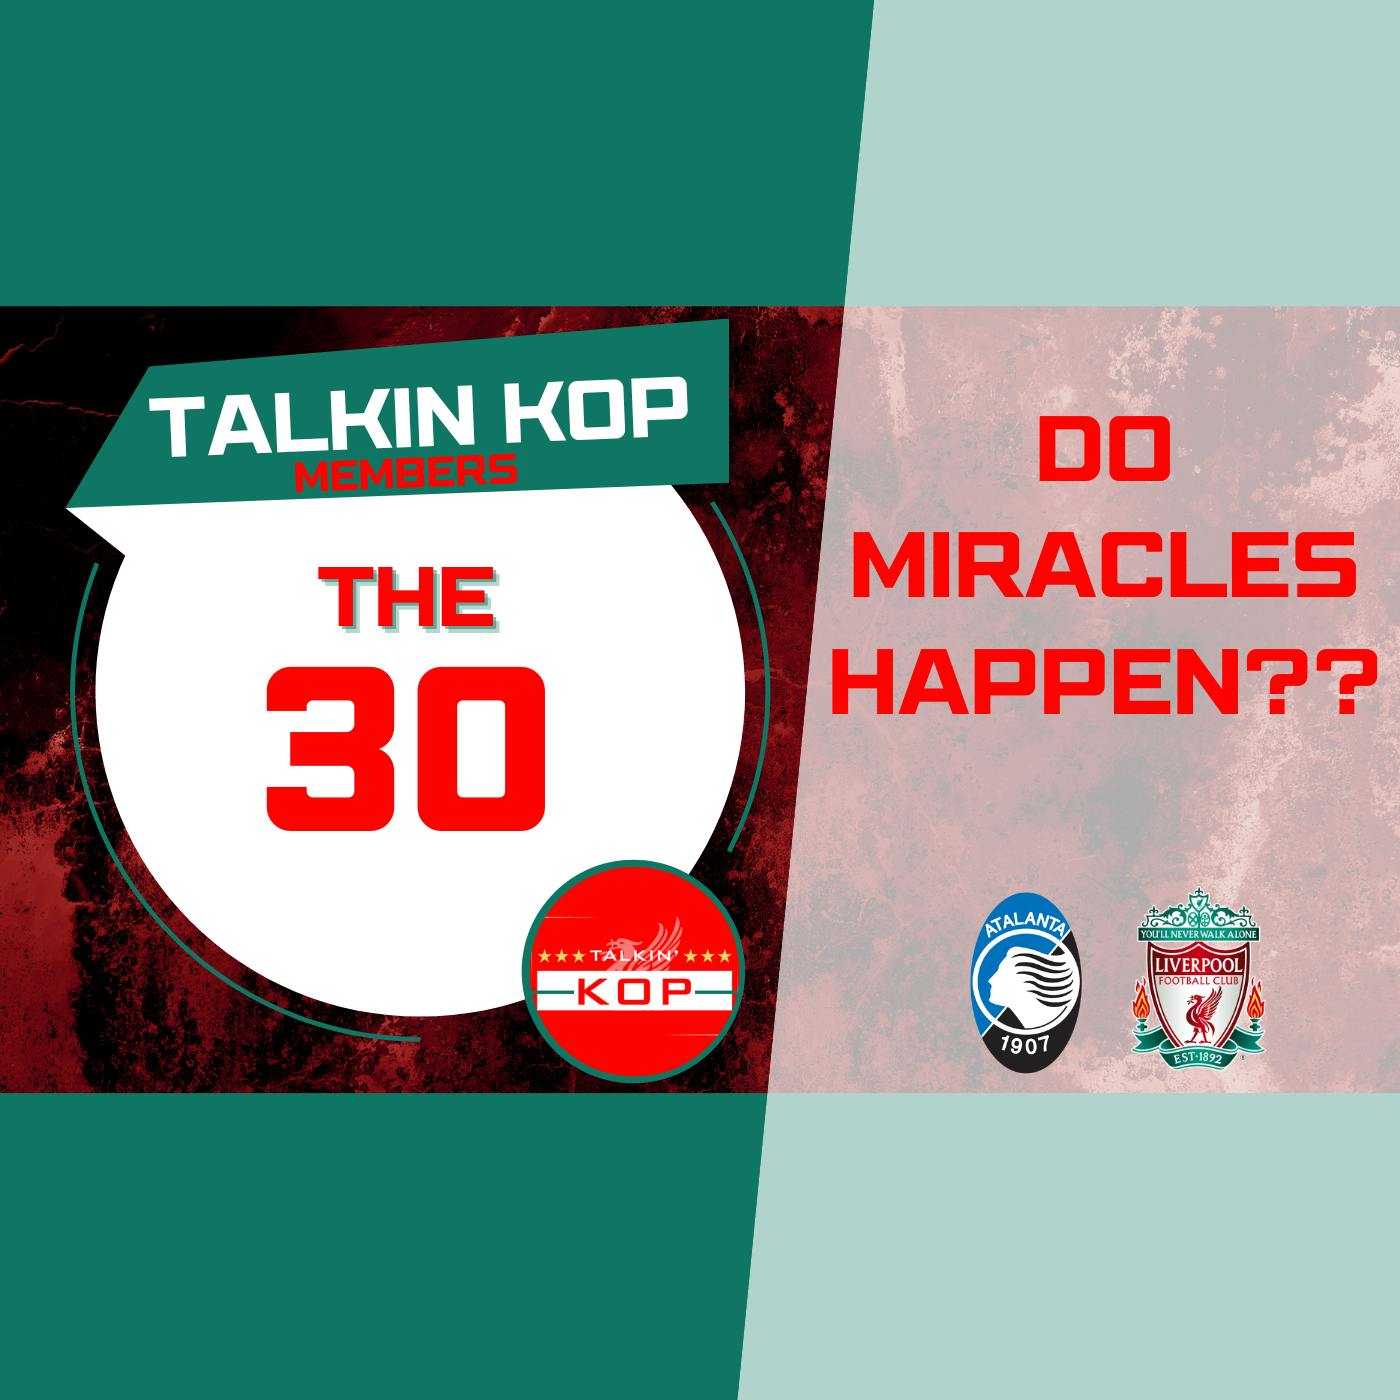 Do Miracles Happen?? | The 30